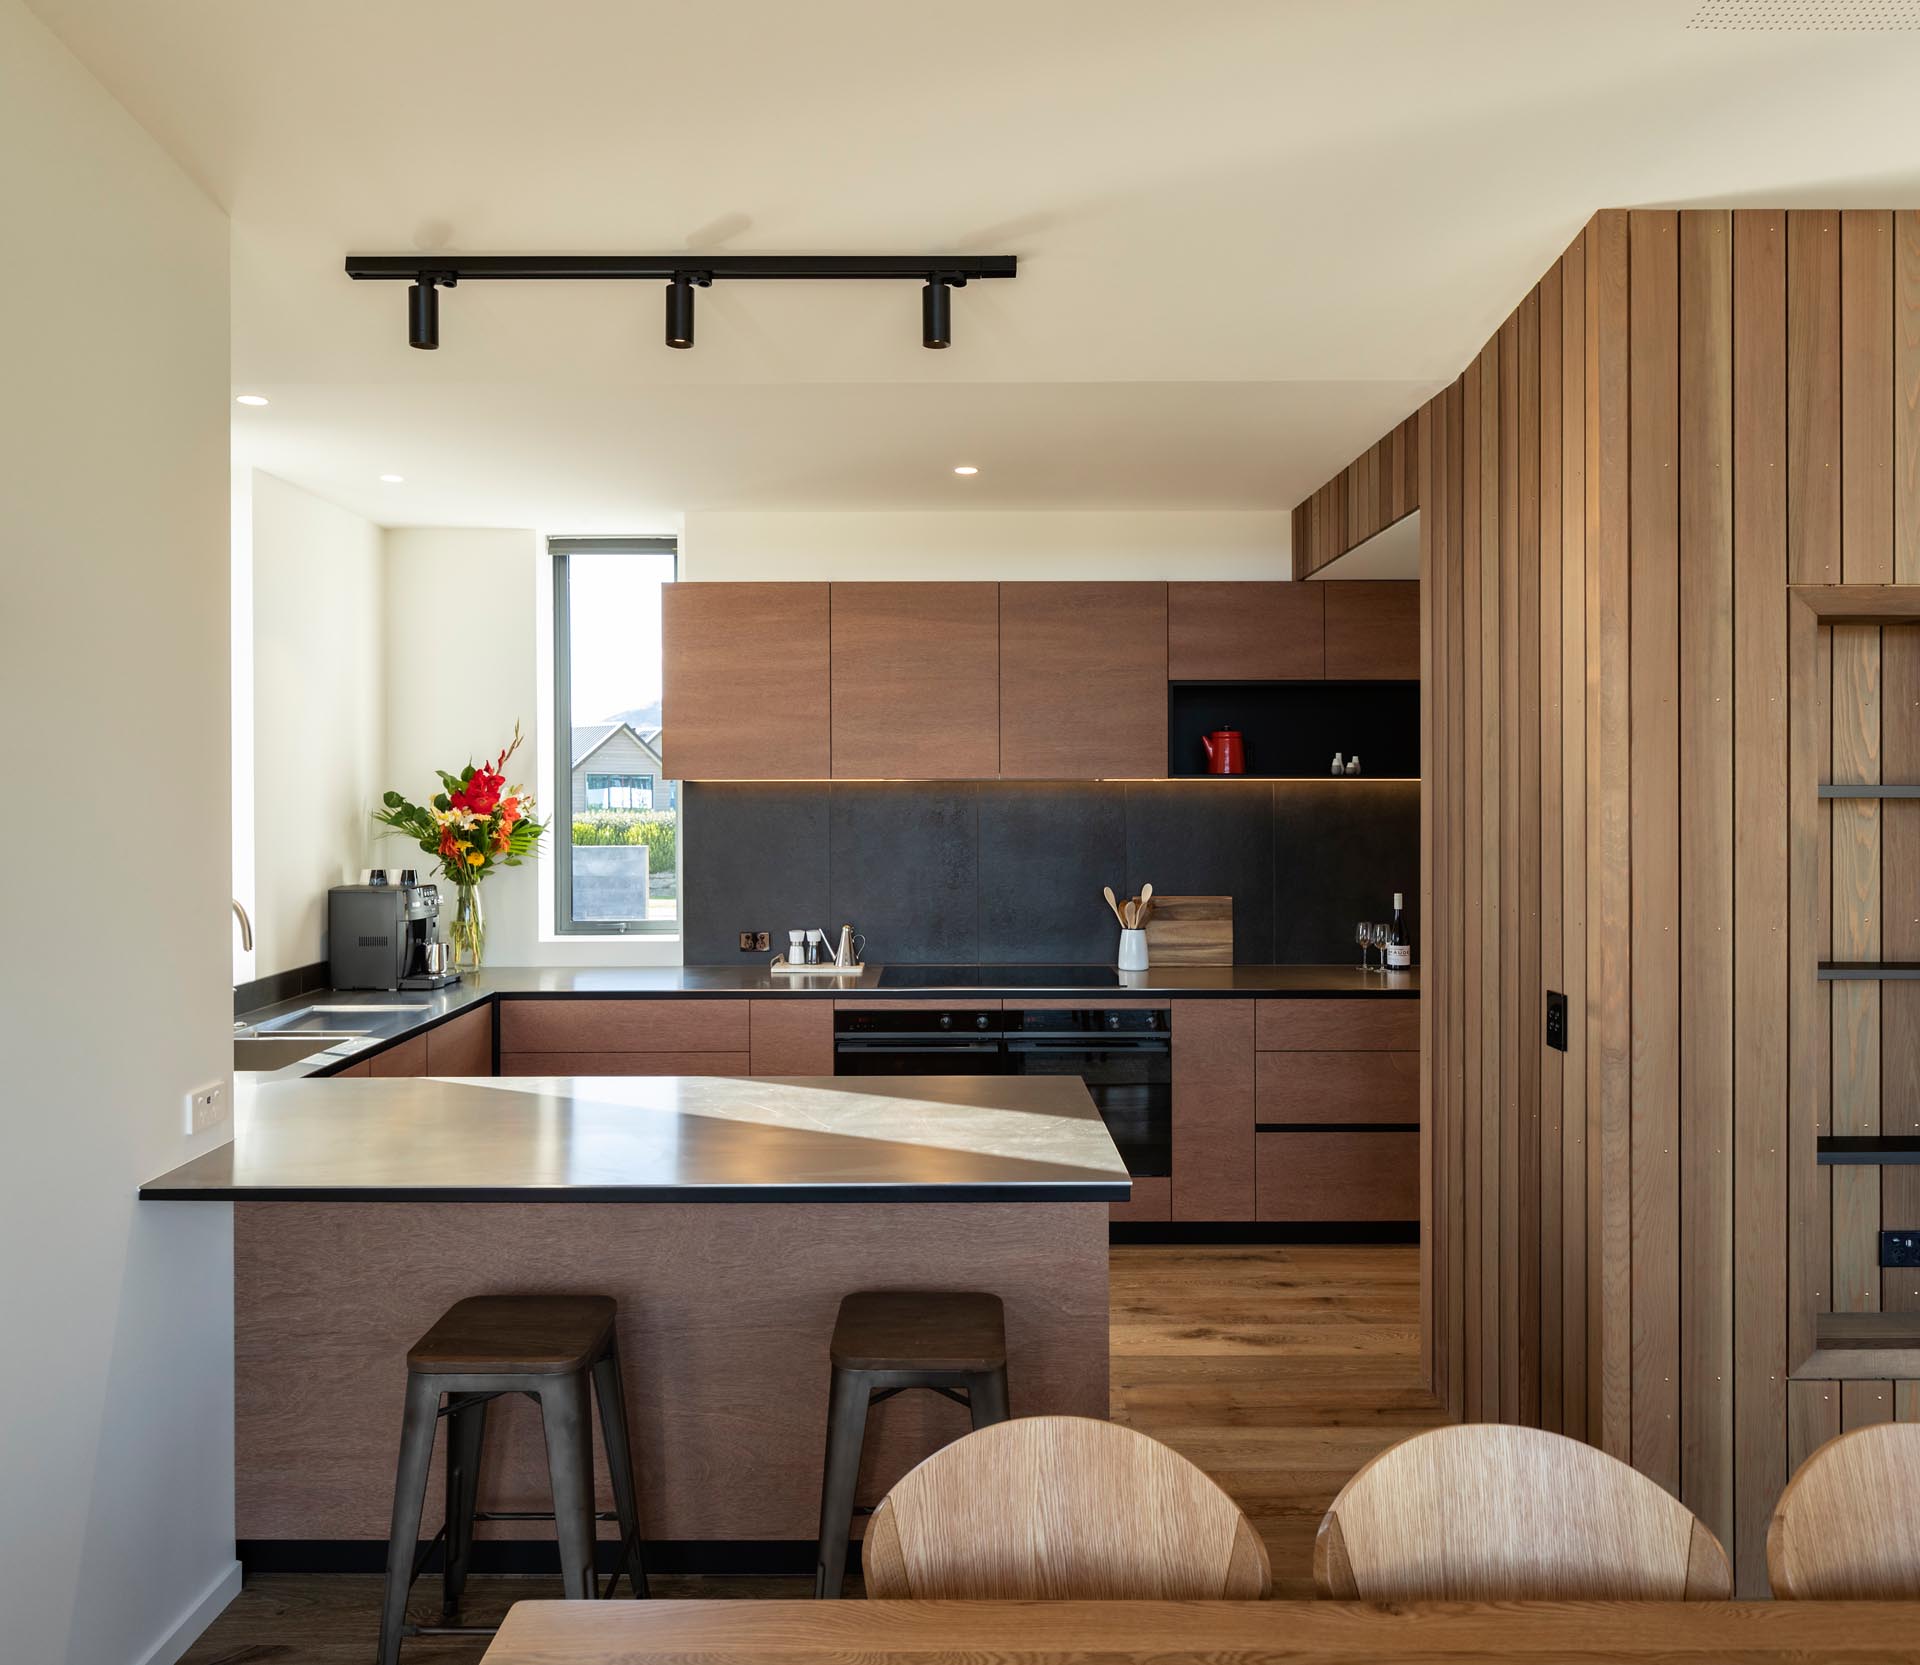 A modern kitchen with minimalist warm wood cabinets that have been paired with a gray backsplash and dark countertops for a contemporary look.